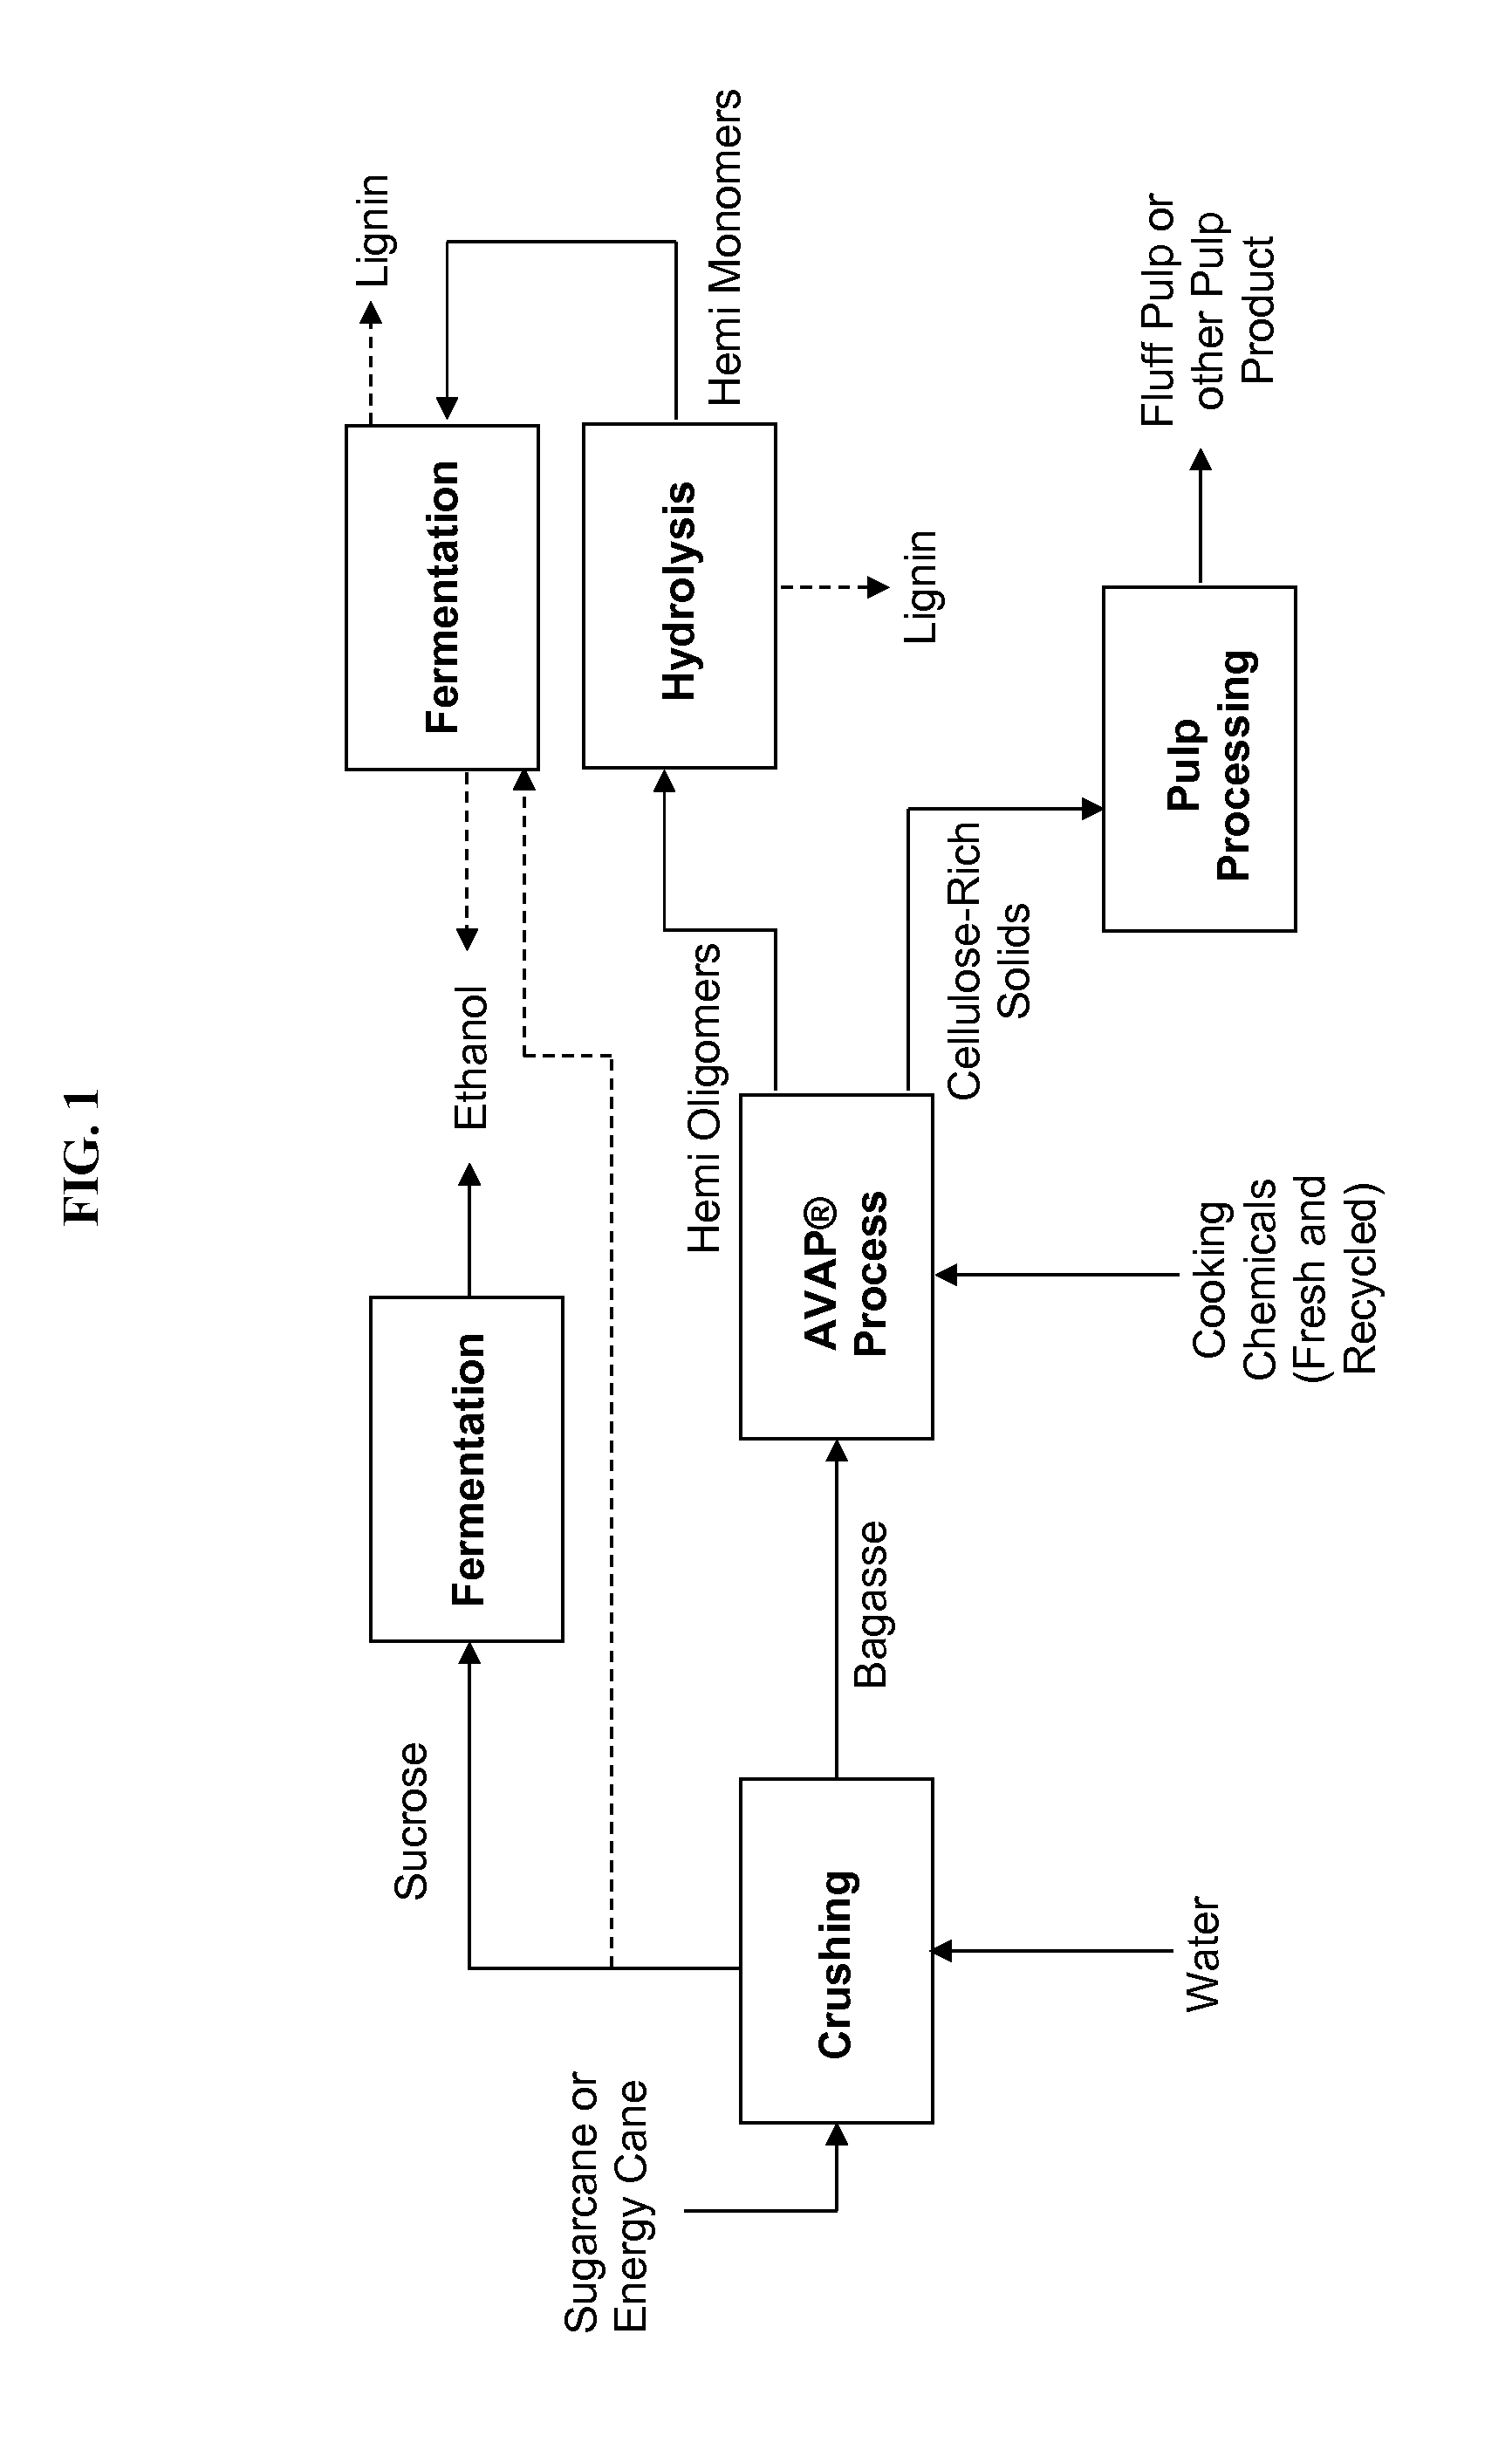 Processes for producing fluff pulp and ethanol from sugarcane